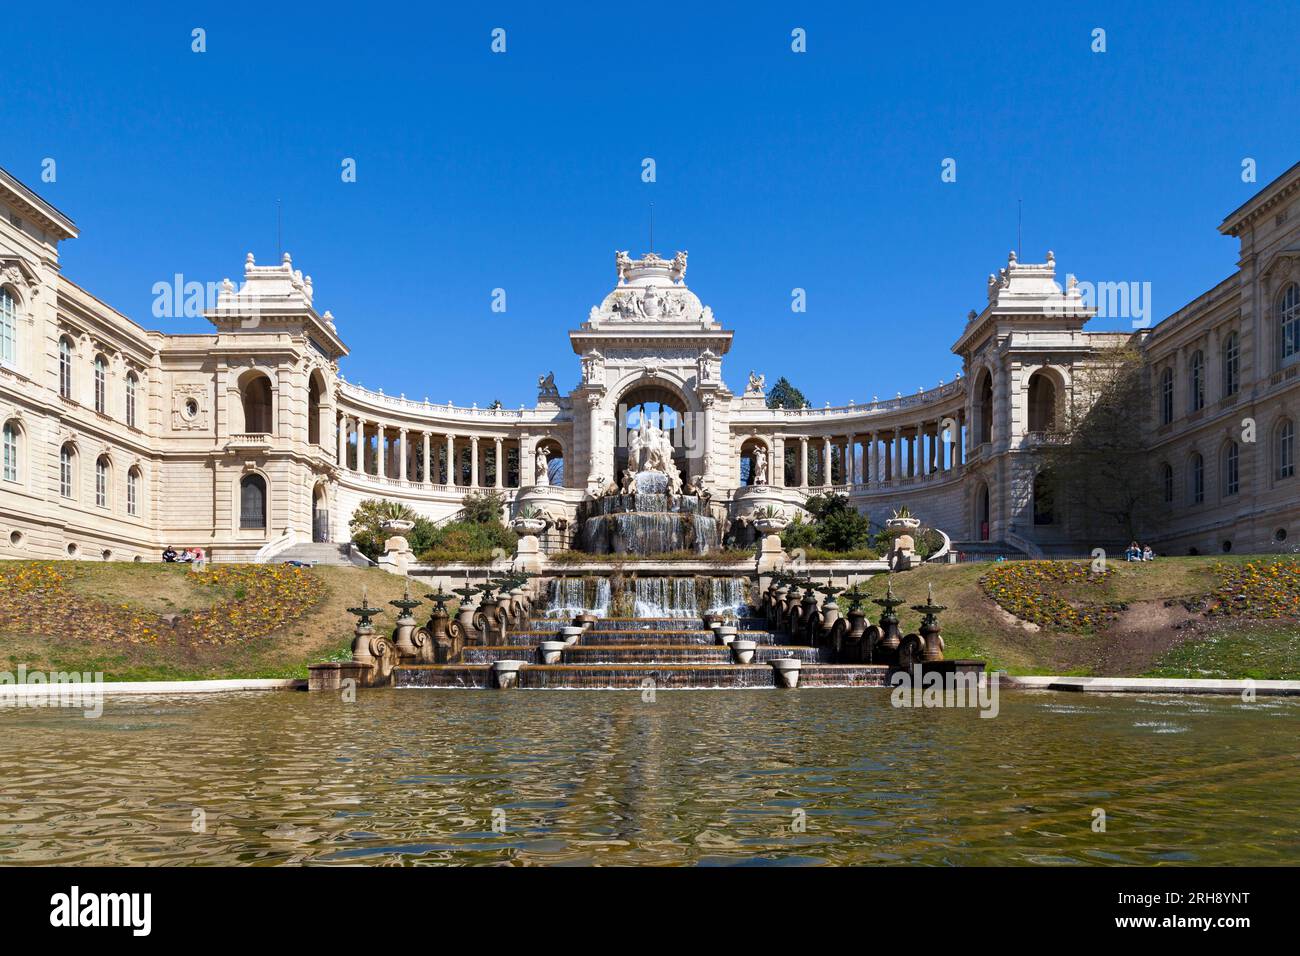 Marseille, France - March 23 2019: The château d'eau of the Palais Longchamp. The Palais Longchamp was created in 1839 to celebrate the construction o Stock Photo